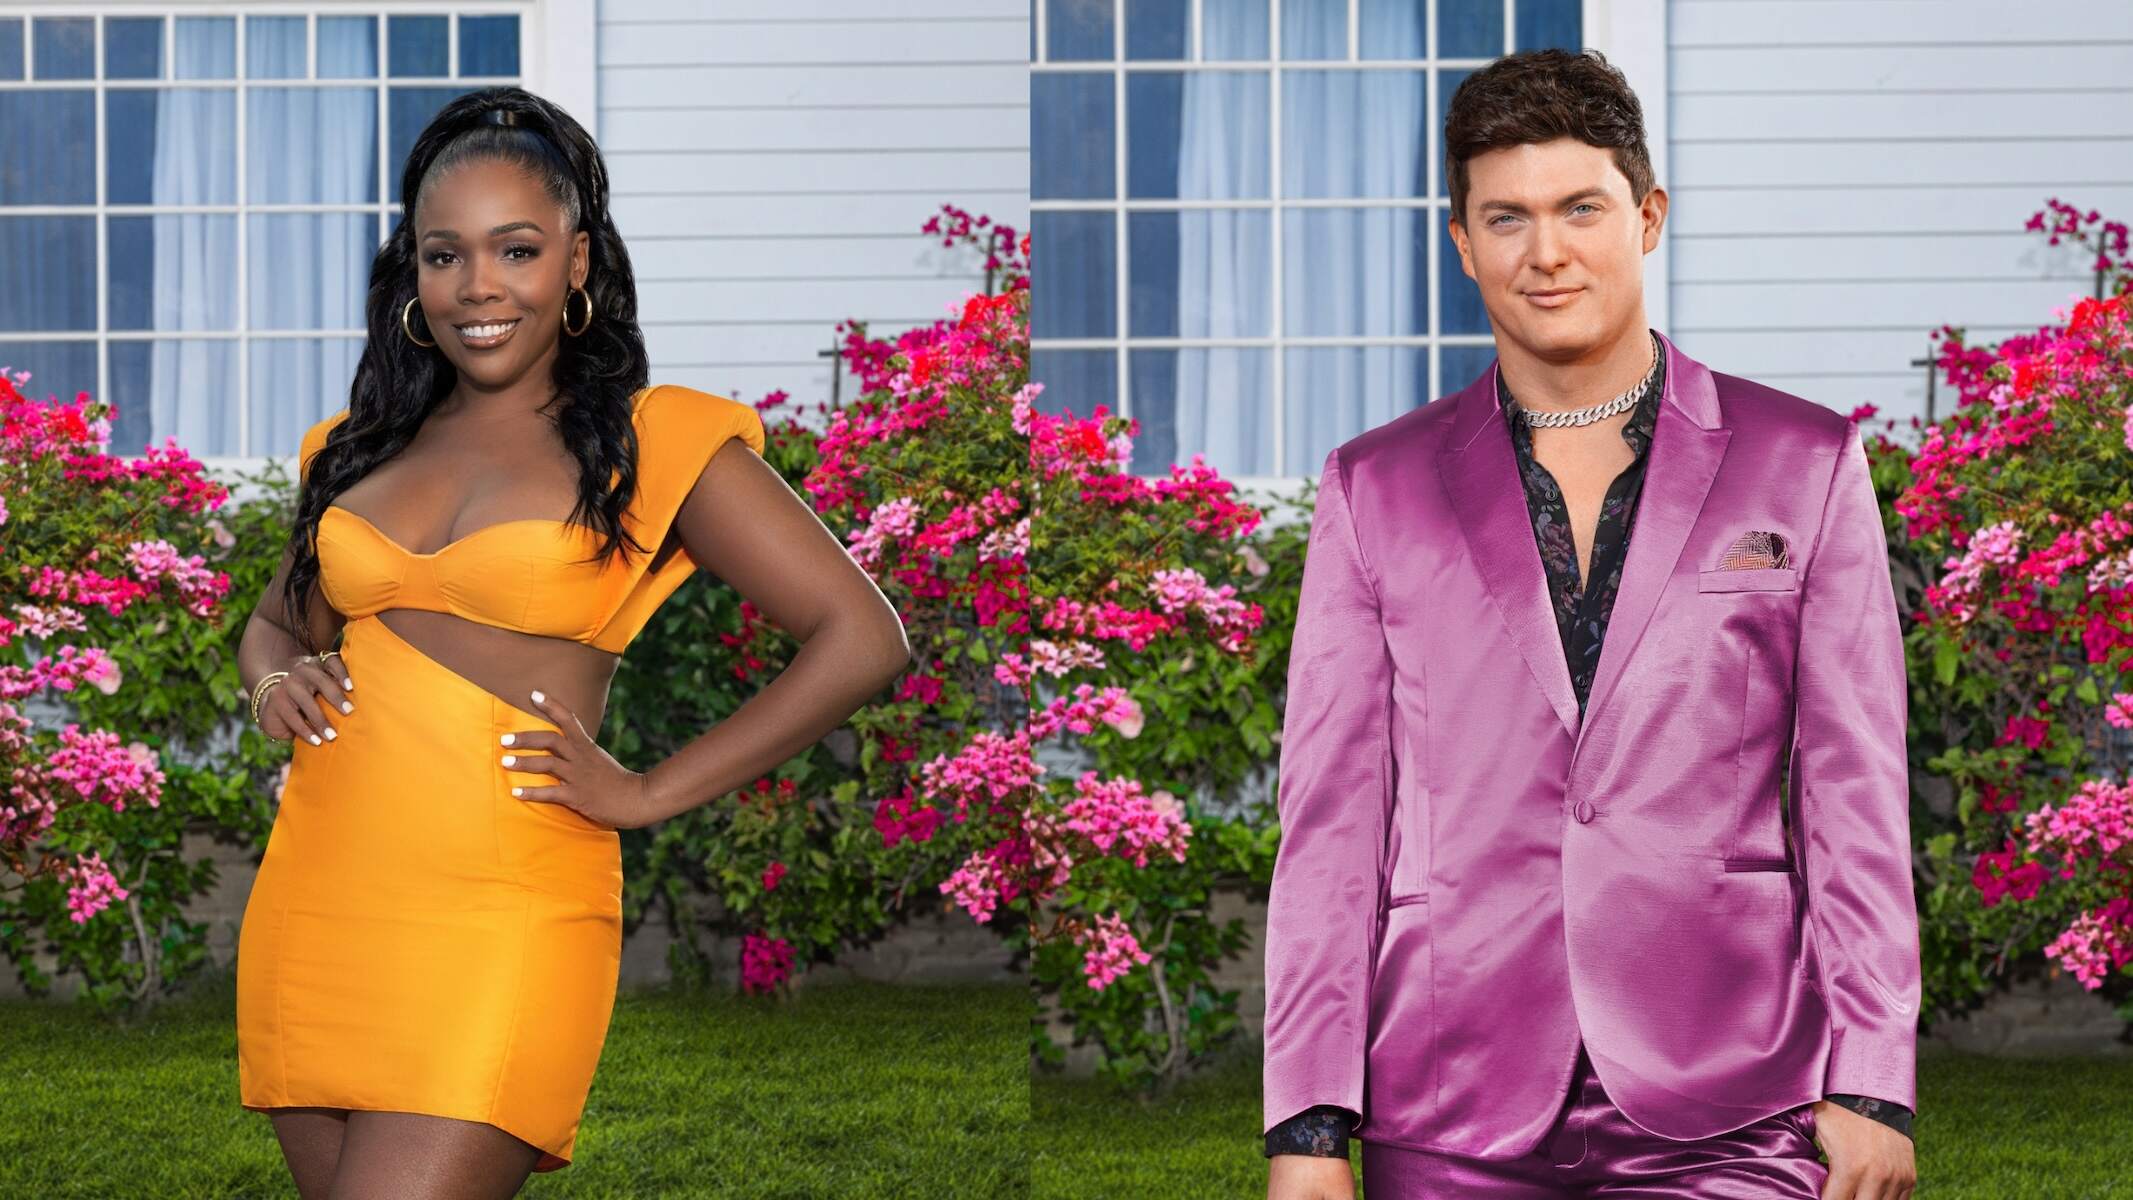 Cast members of The Valley, Jasmine Goode and Zack Wickham, wear a yellow dress and purple suit